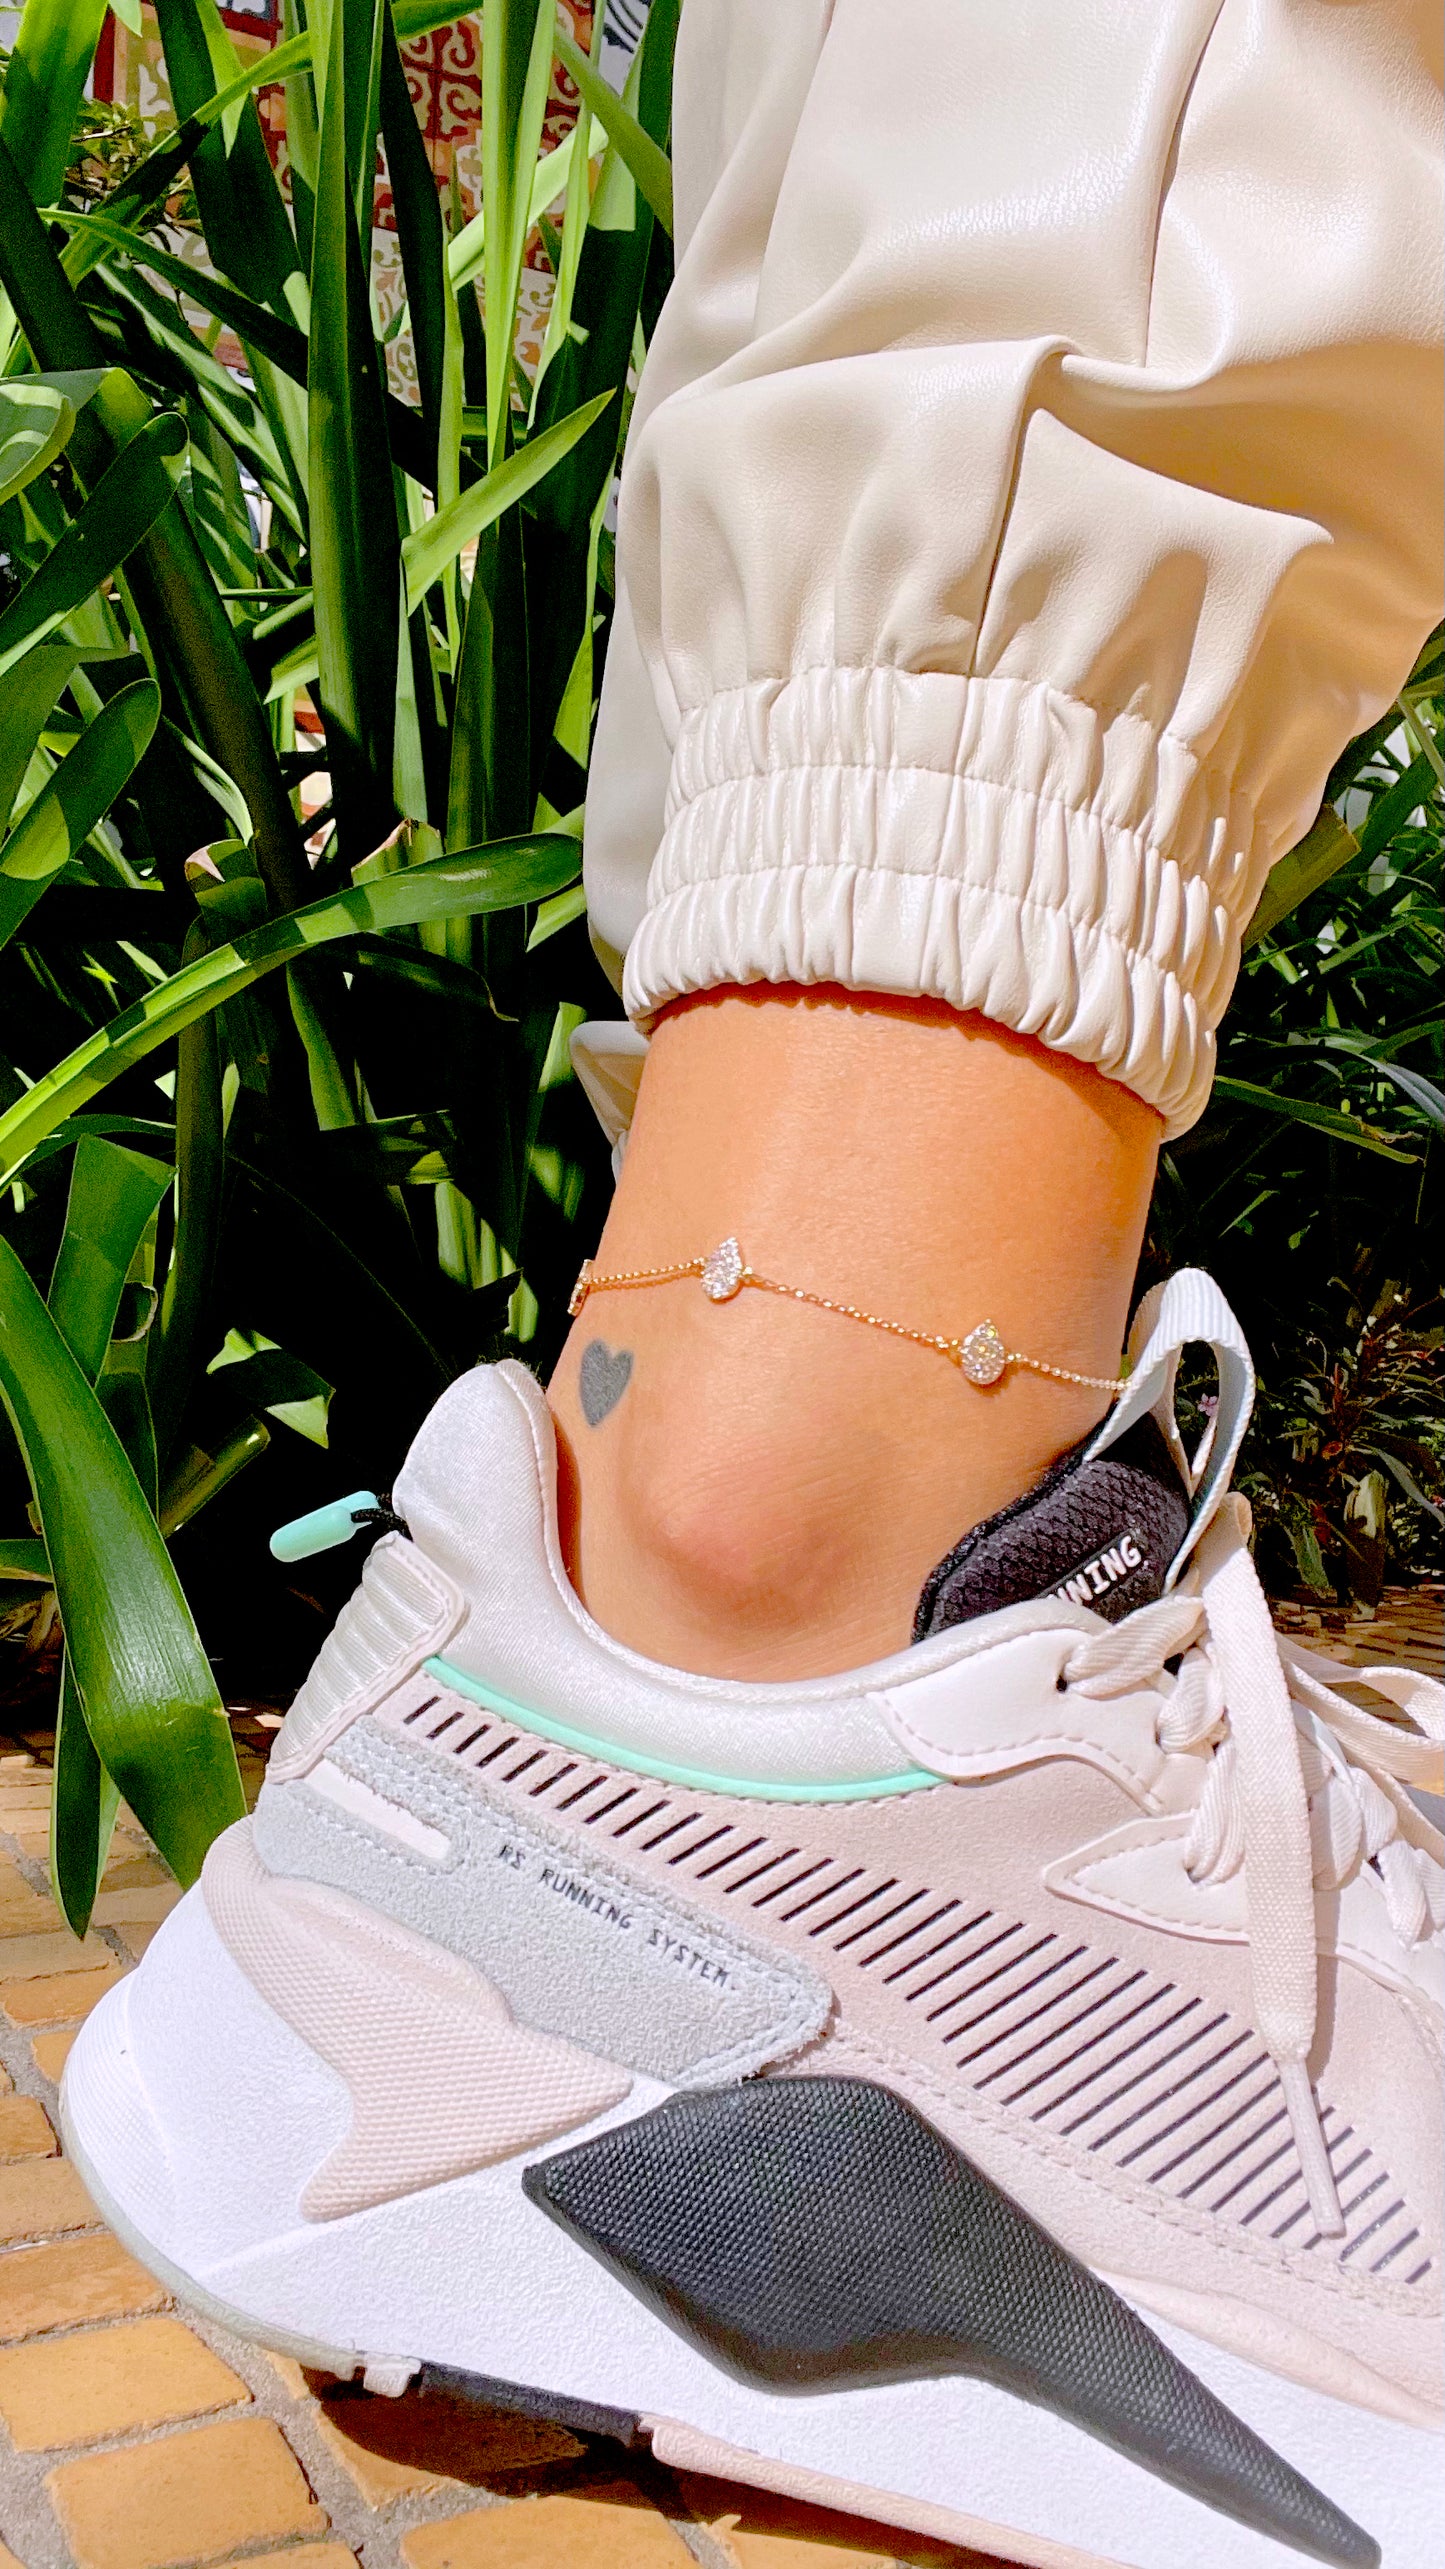 Anklet with stud drops